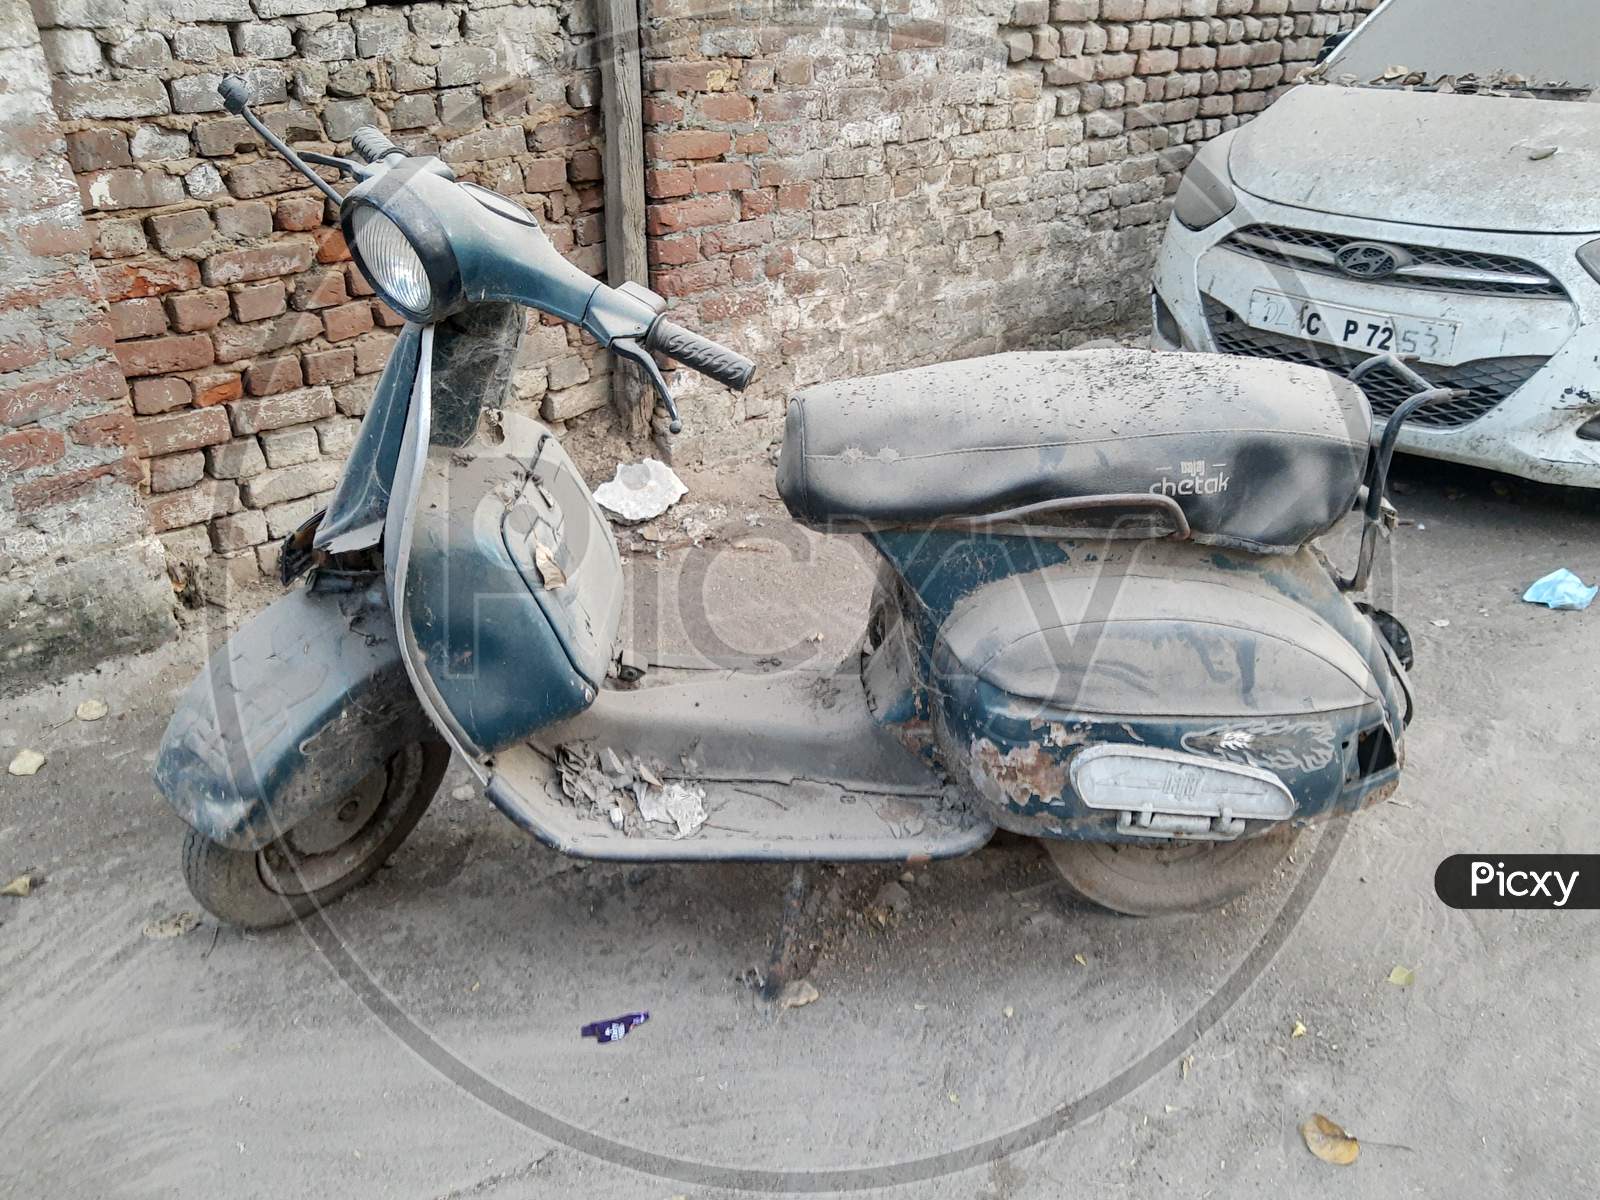 An Old Bajaj Scooter On The Street Of India